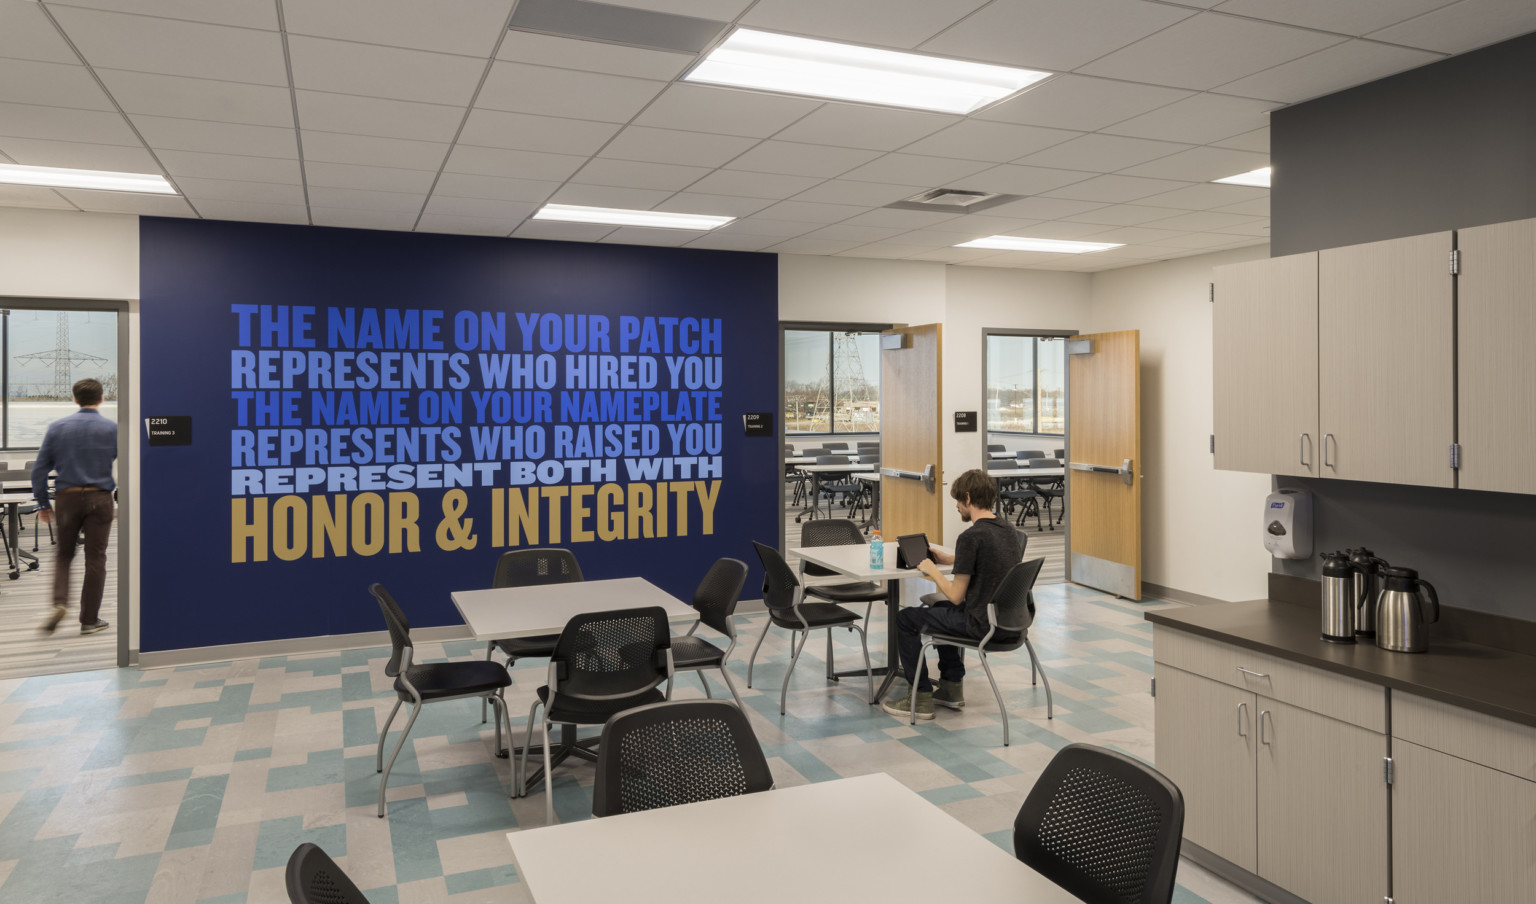 inside room with chairs and blue wall mural with blue and yellow words saying to represent the department and their name well